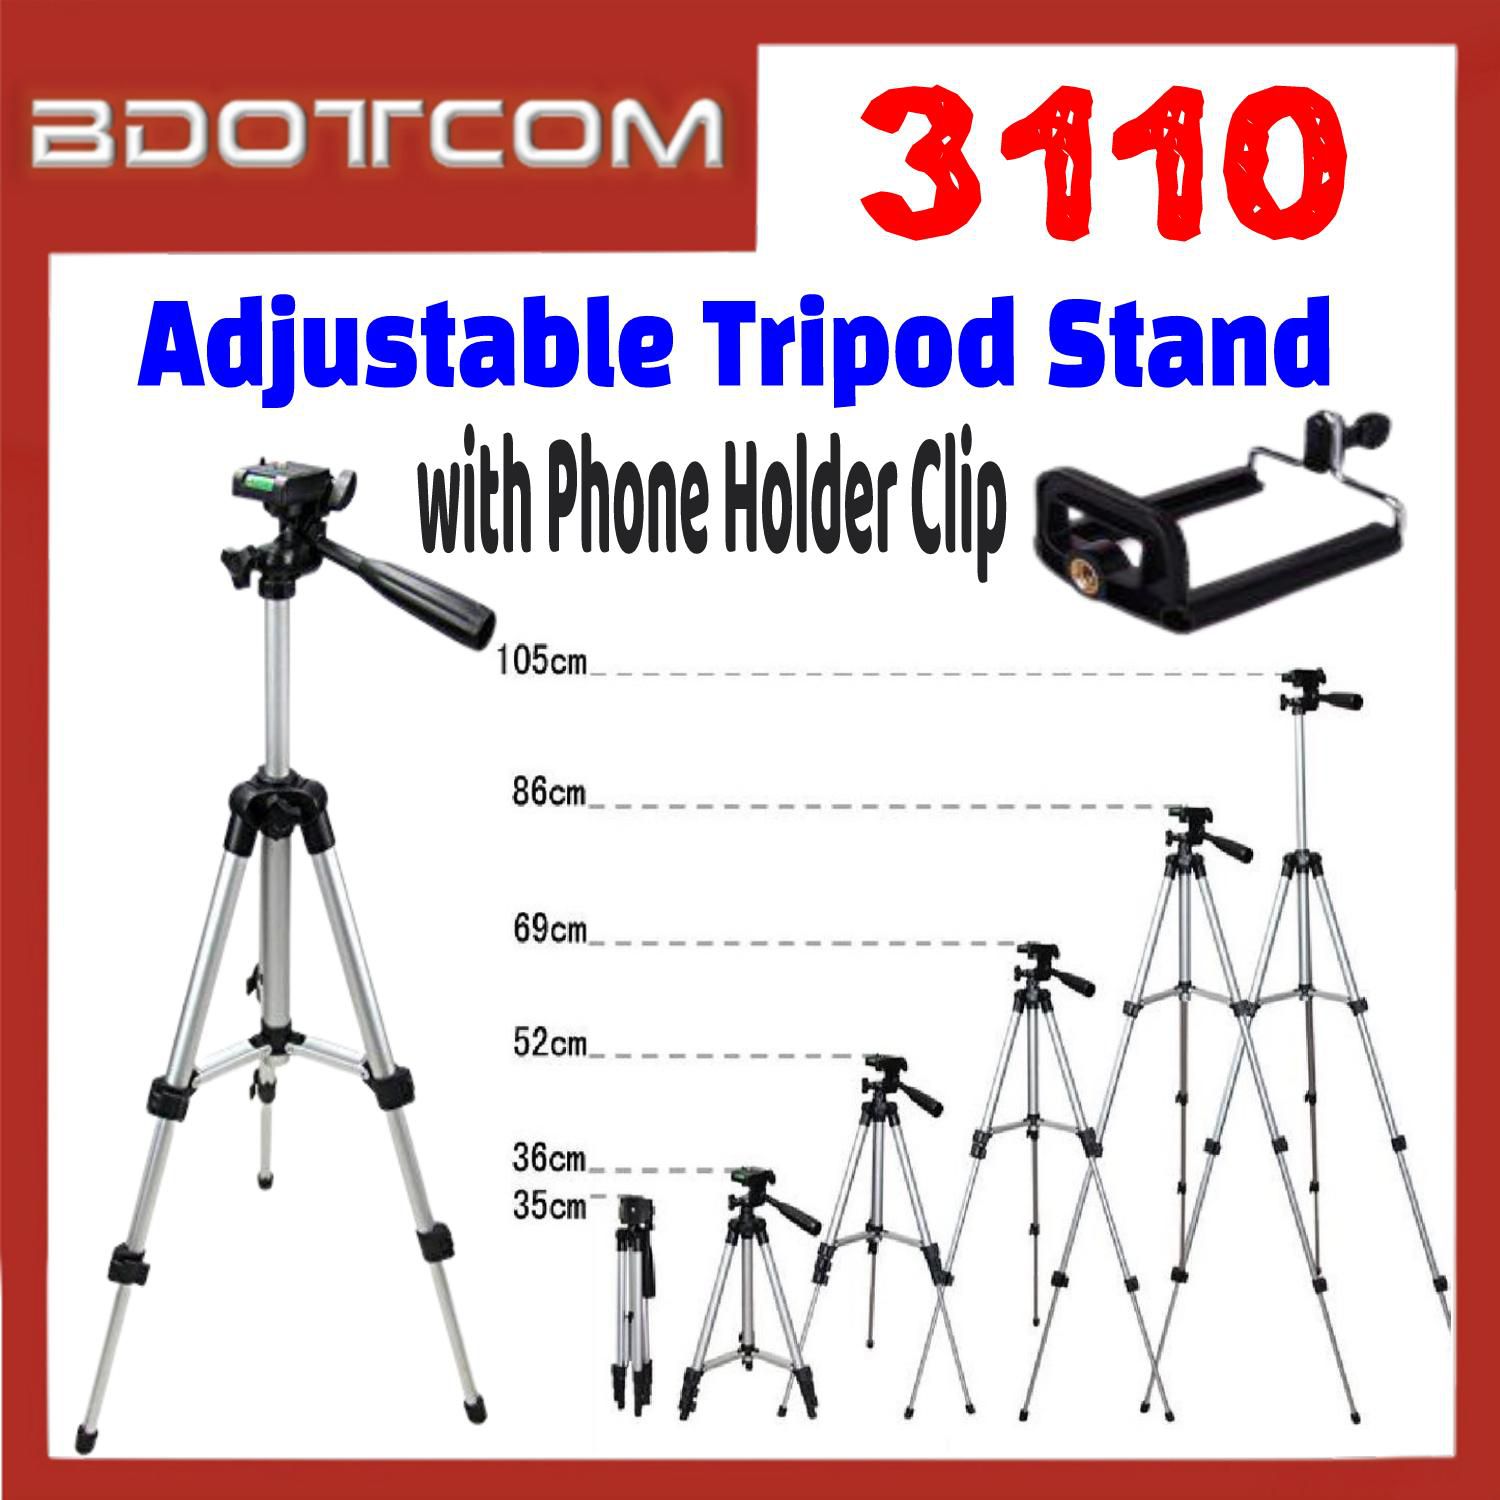 [ Ready Stock ] 3110 Adjustable Tripod Stand with Phone Holder Clip for Smartphone